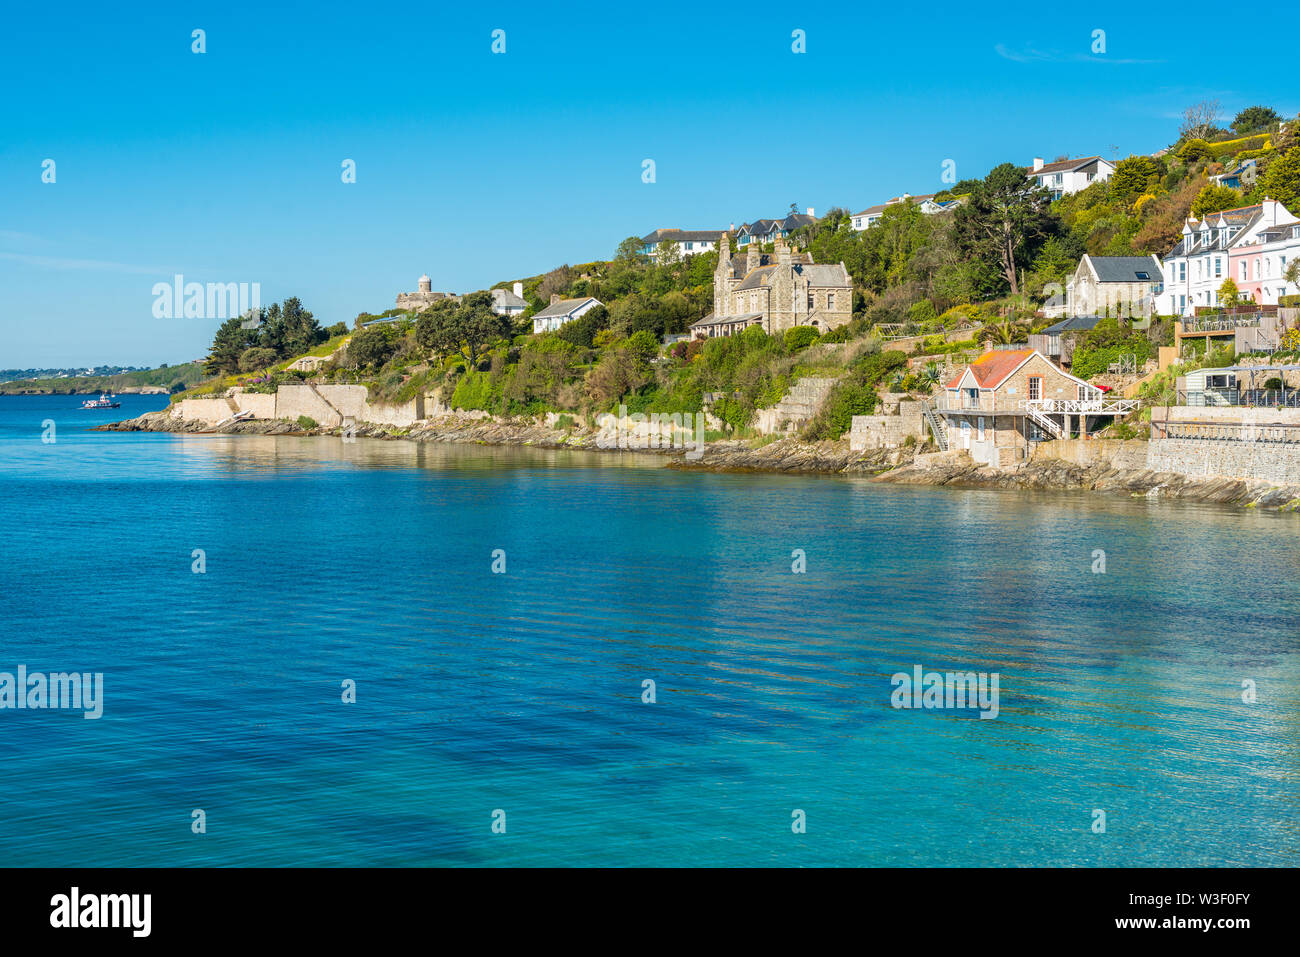 The picturesque village of St Mawes on the Roseland Peninsula near Falmouth in Cornwall, England, UK. Stock Photo